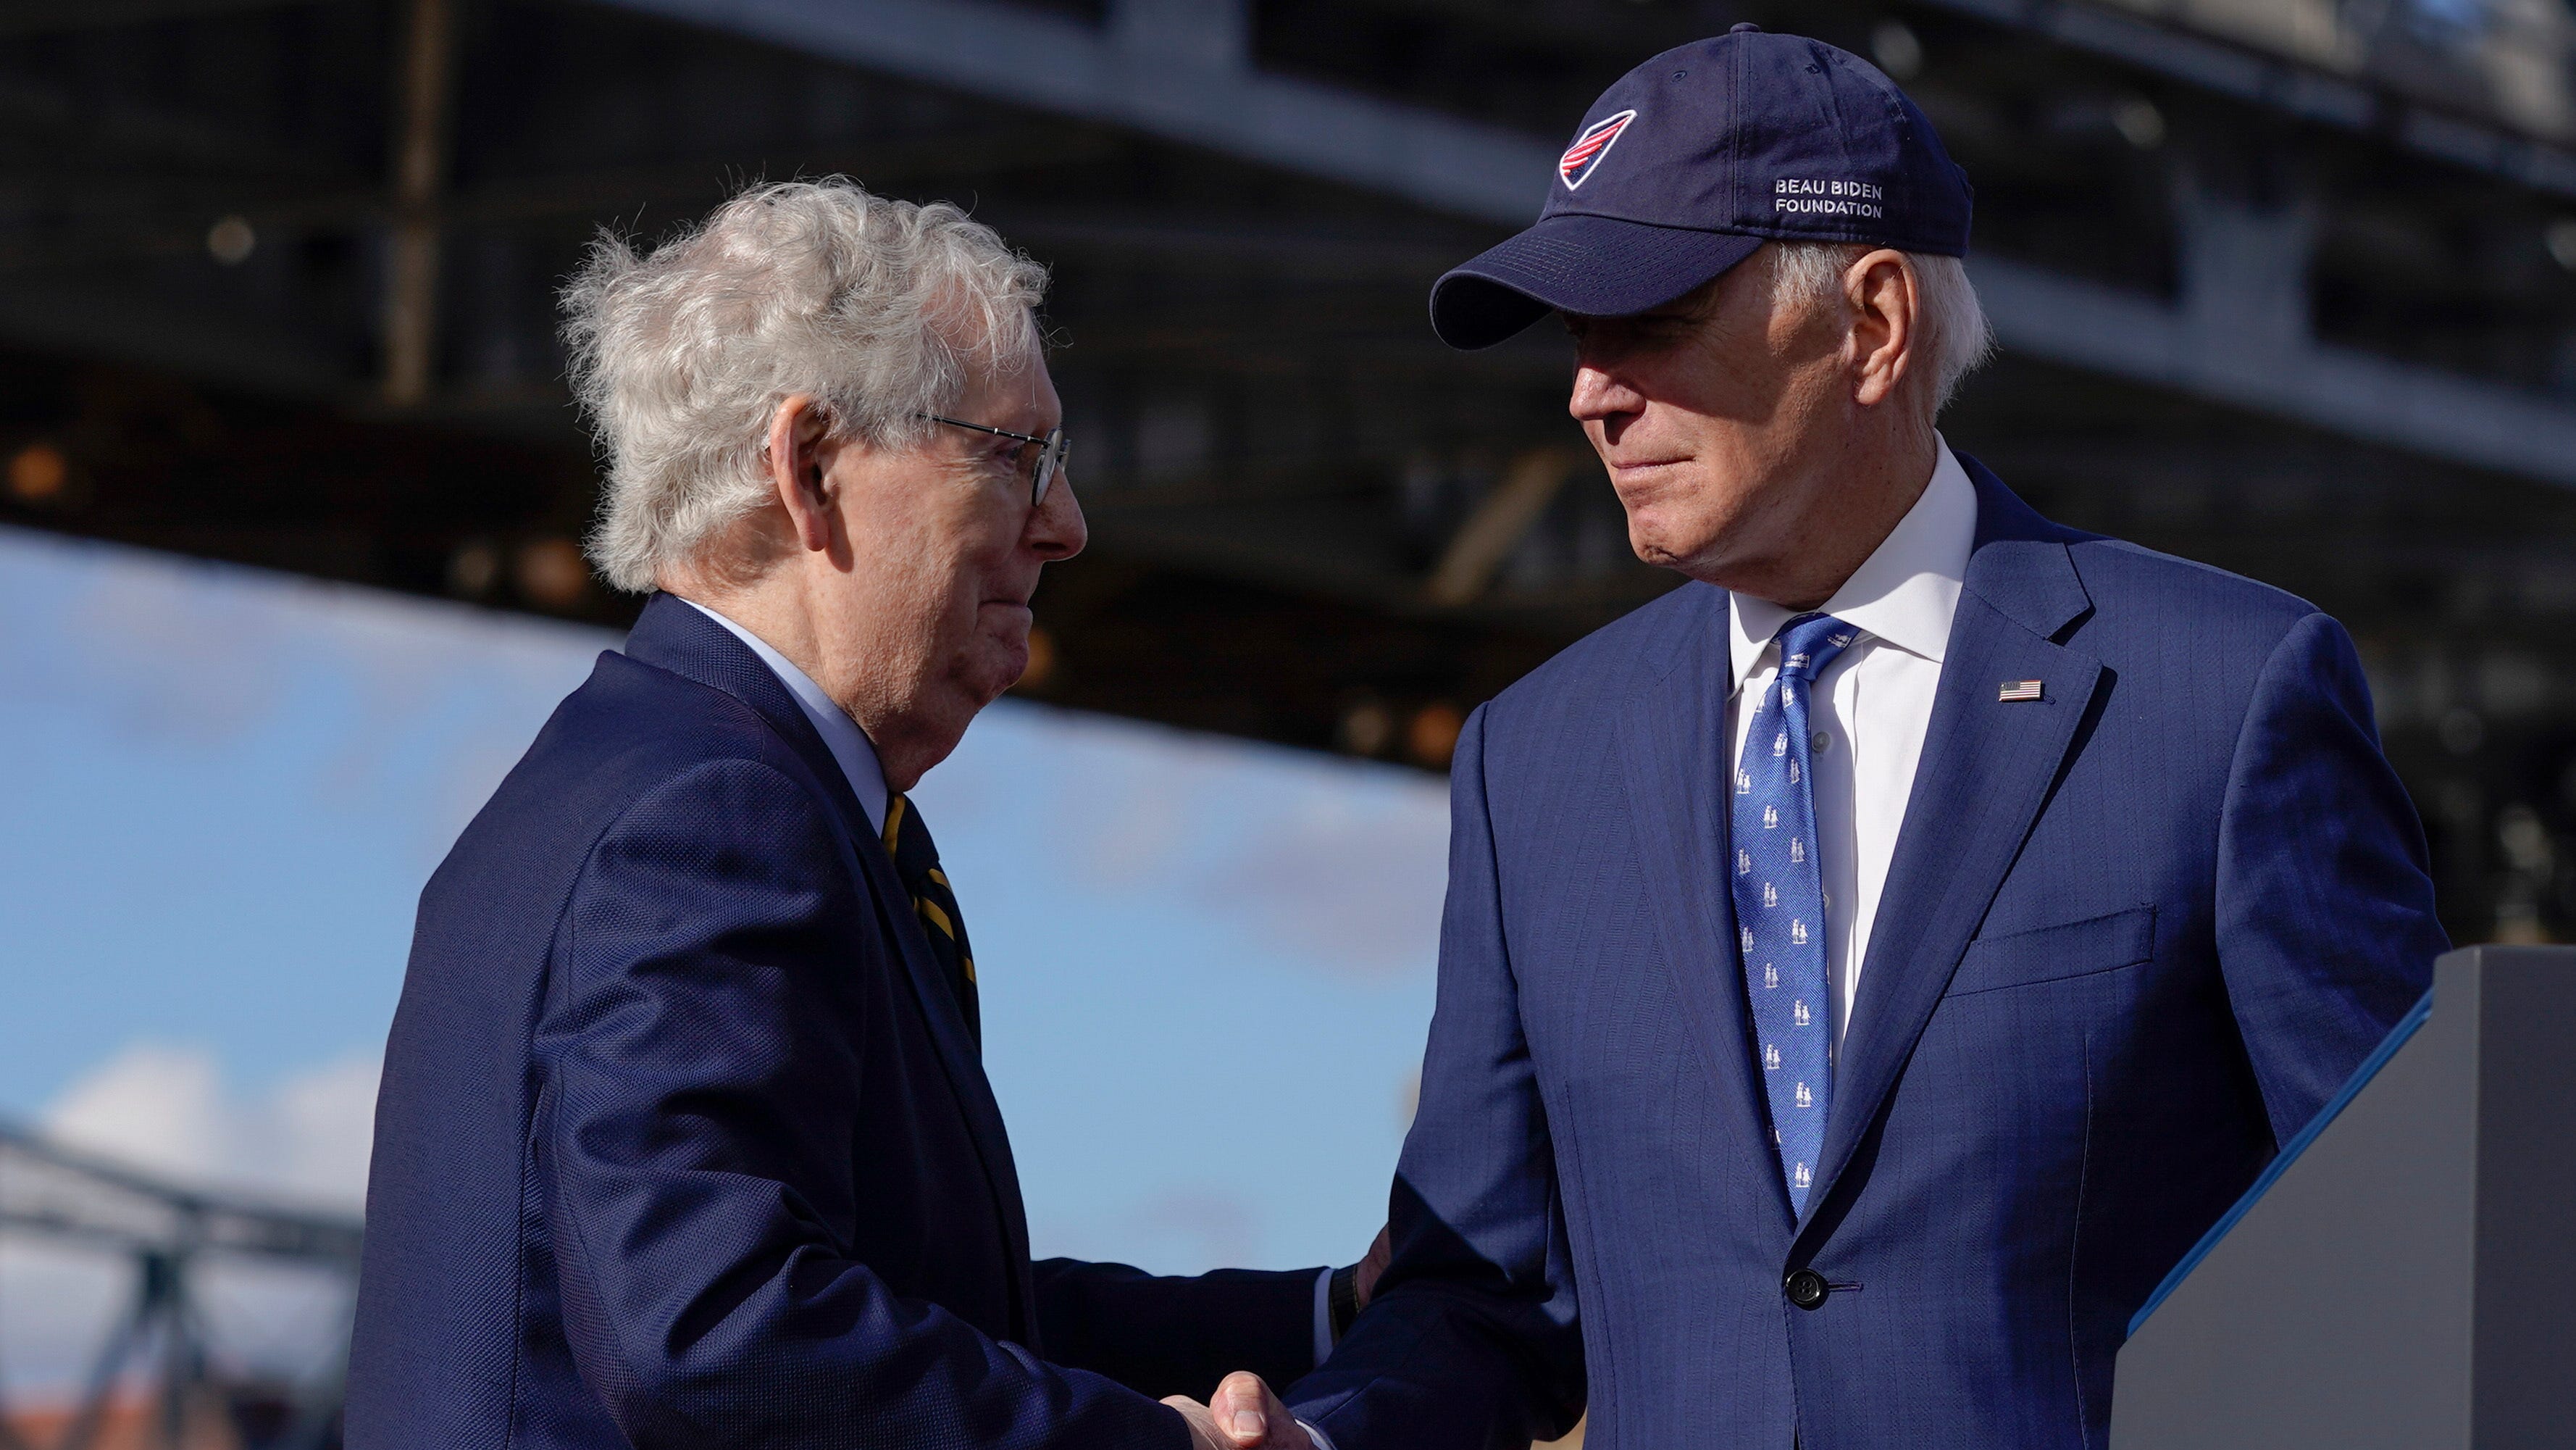 President Joe Biden shakes hands with Senate Minority Leader Mitch McConnell of Ky., after speaking about his infrastructure agenda under the Clay Wade Bailey Bridge, Wednesday, Jan. 4, 2023, in Covington, Ky. Biden's infrastructure deal that was enacted in late 2021 will offer federal grants to Ohio and Kentucky to build a companion bridge that is intended to alleviate traffic on the Brent Spence Bridge, background at left. (AP Photo/Patrick Semansky) ORG XMIT: KYPS443